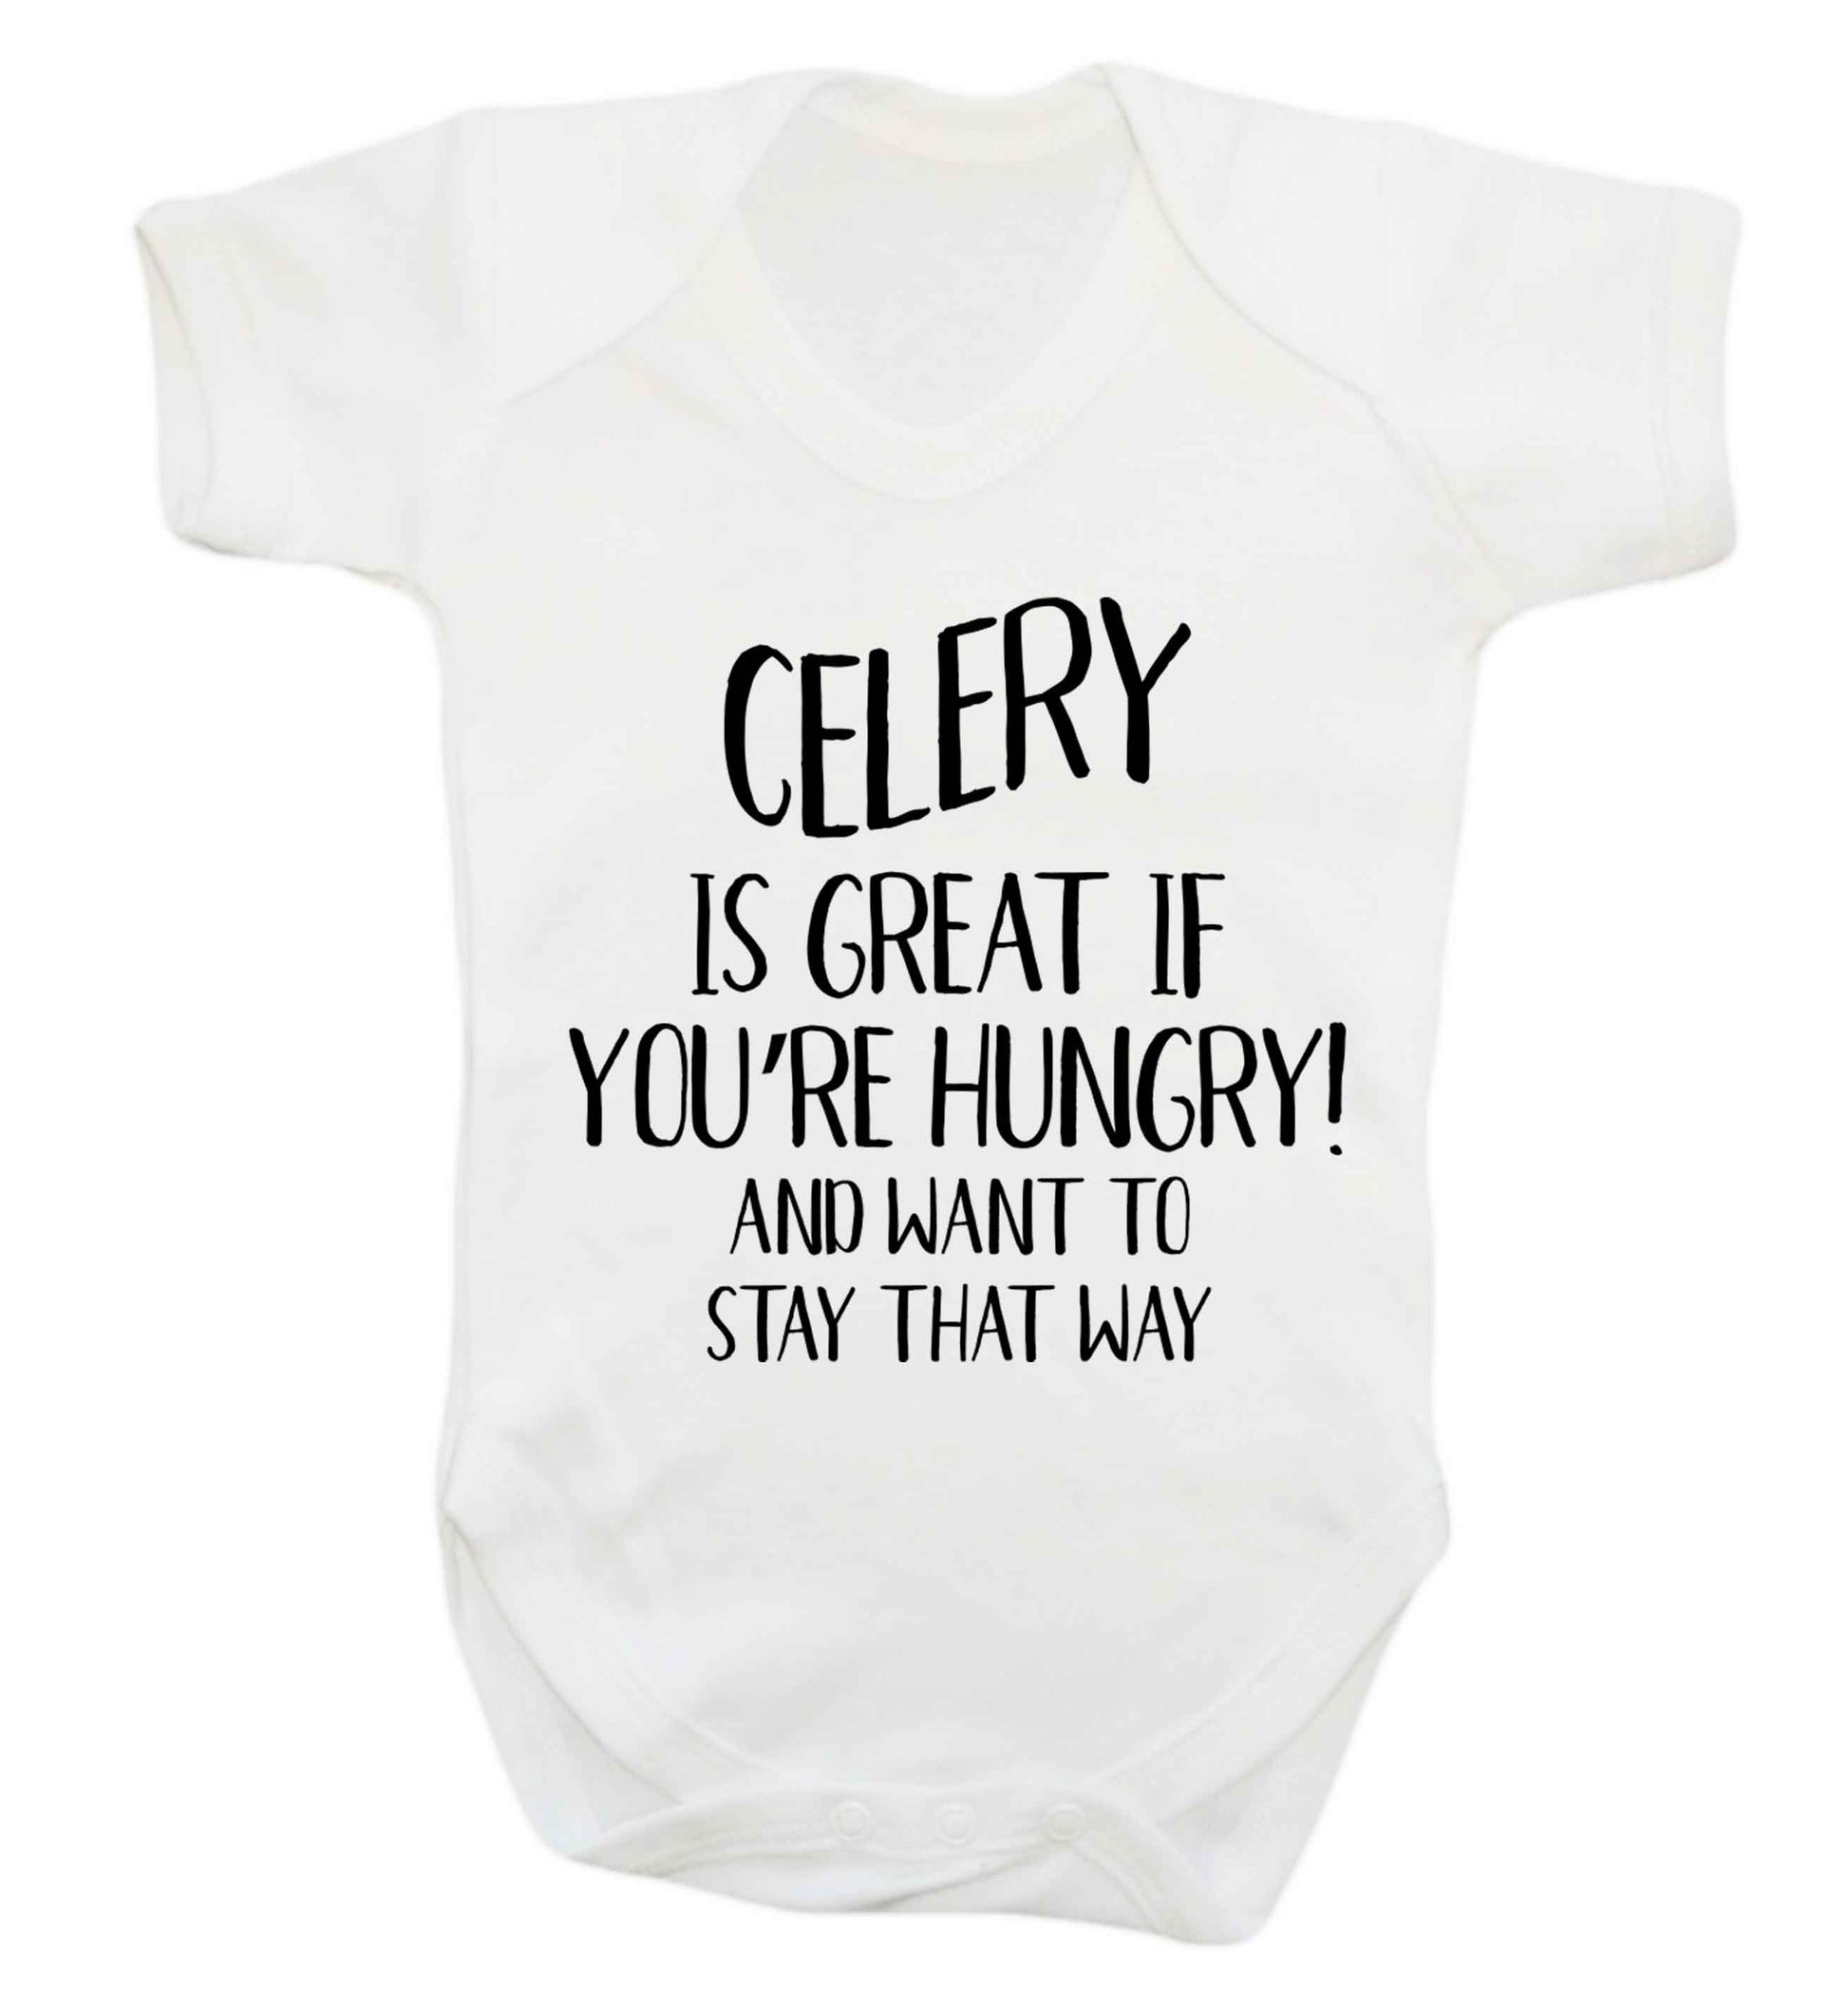 Cellery is great when you're hungry and want to stay that way Baby Vest white 18-24 months